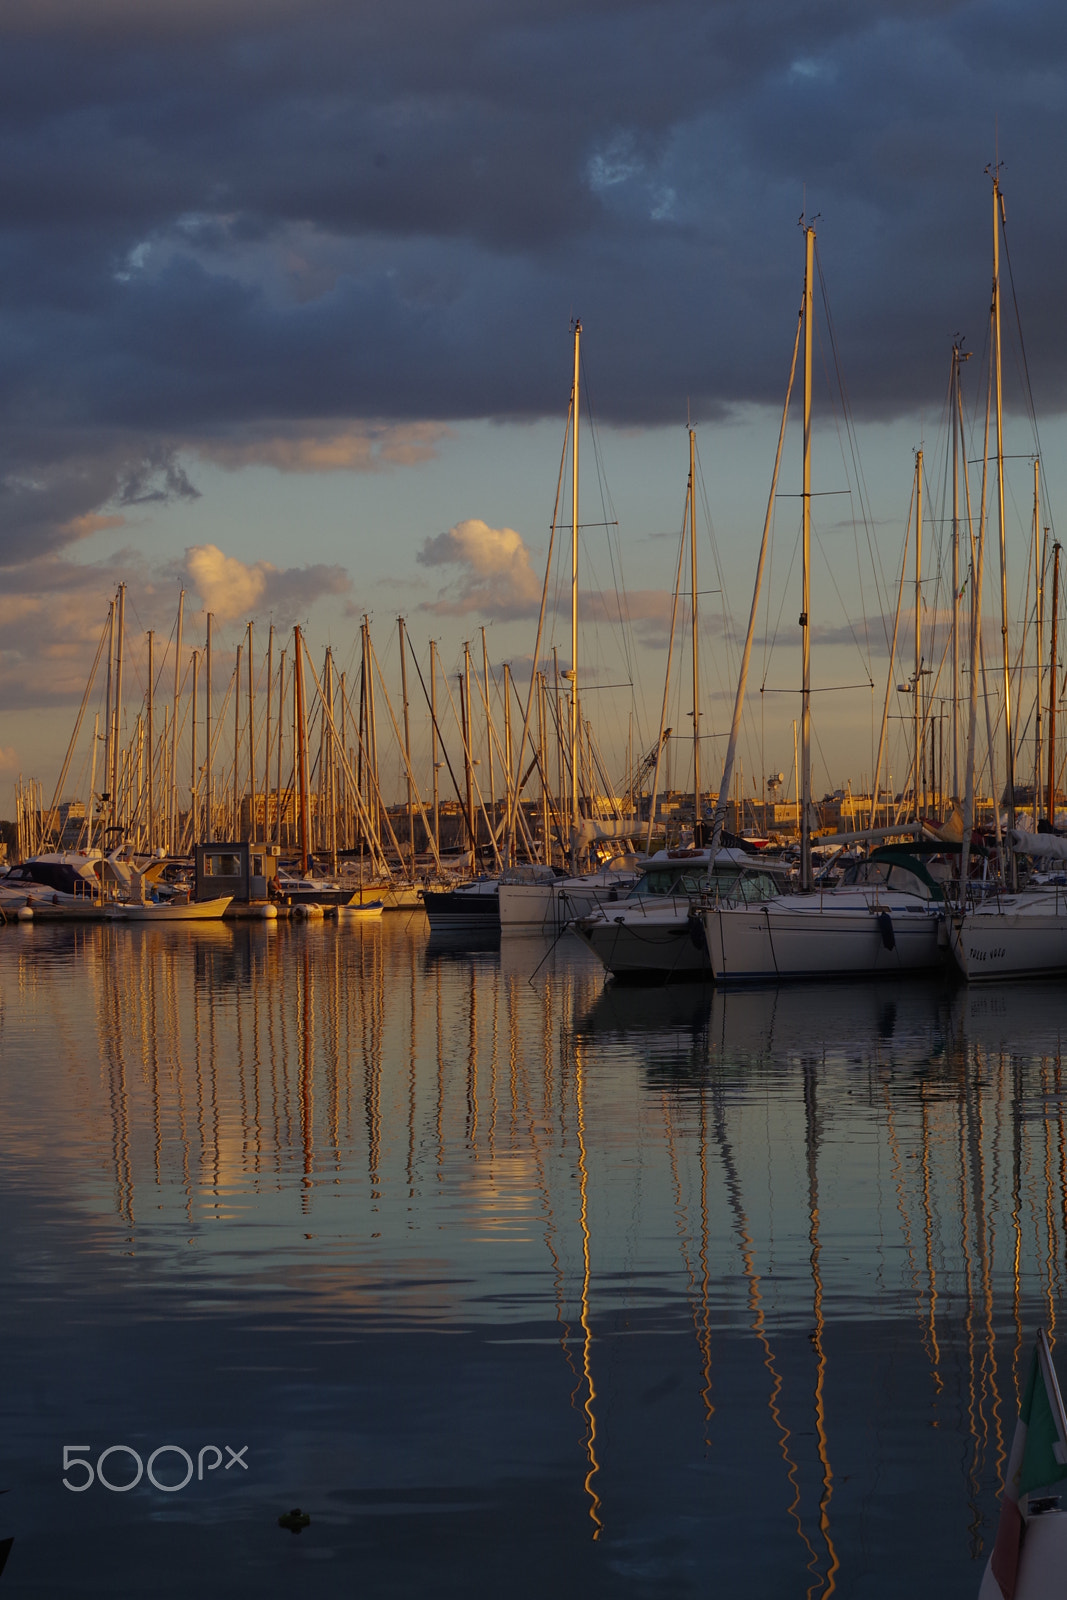 Pentax K-S2 sample photo. Sail boats in a yellow light in a rainy day photography